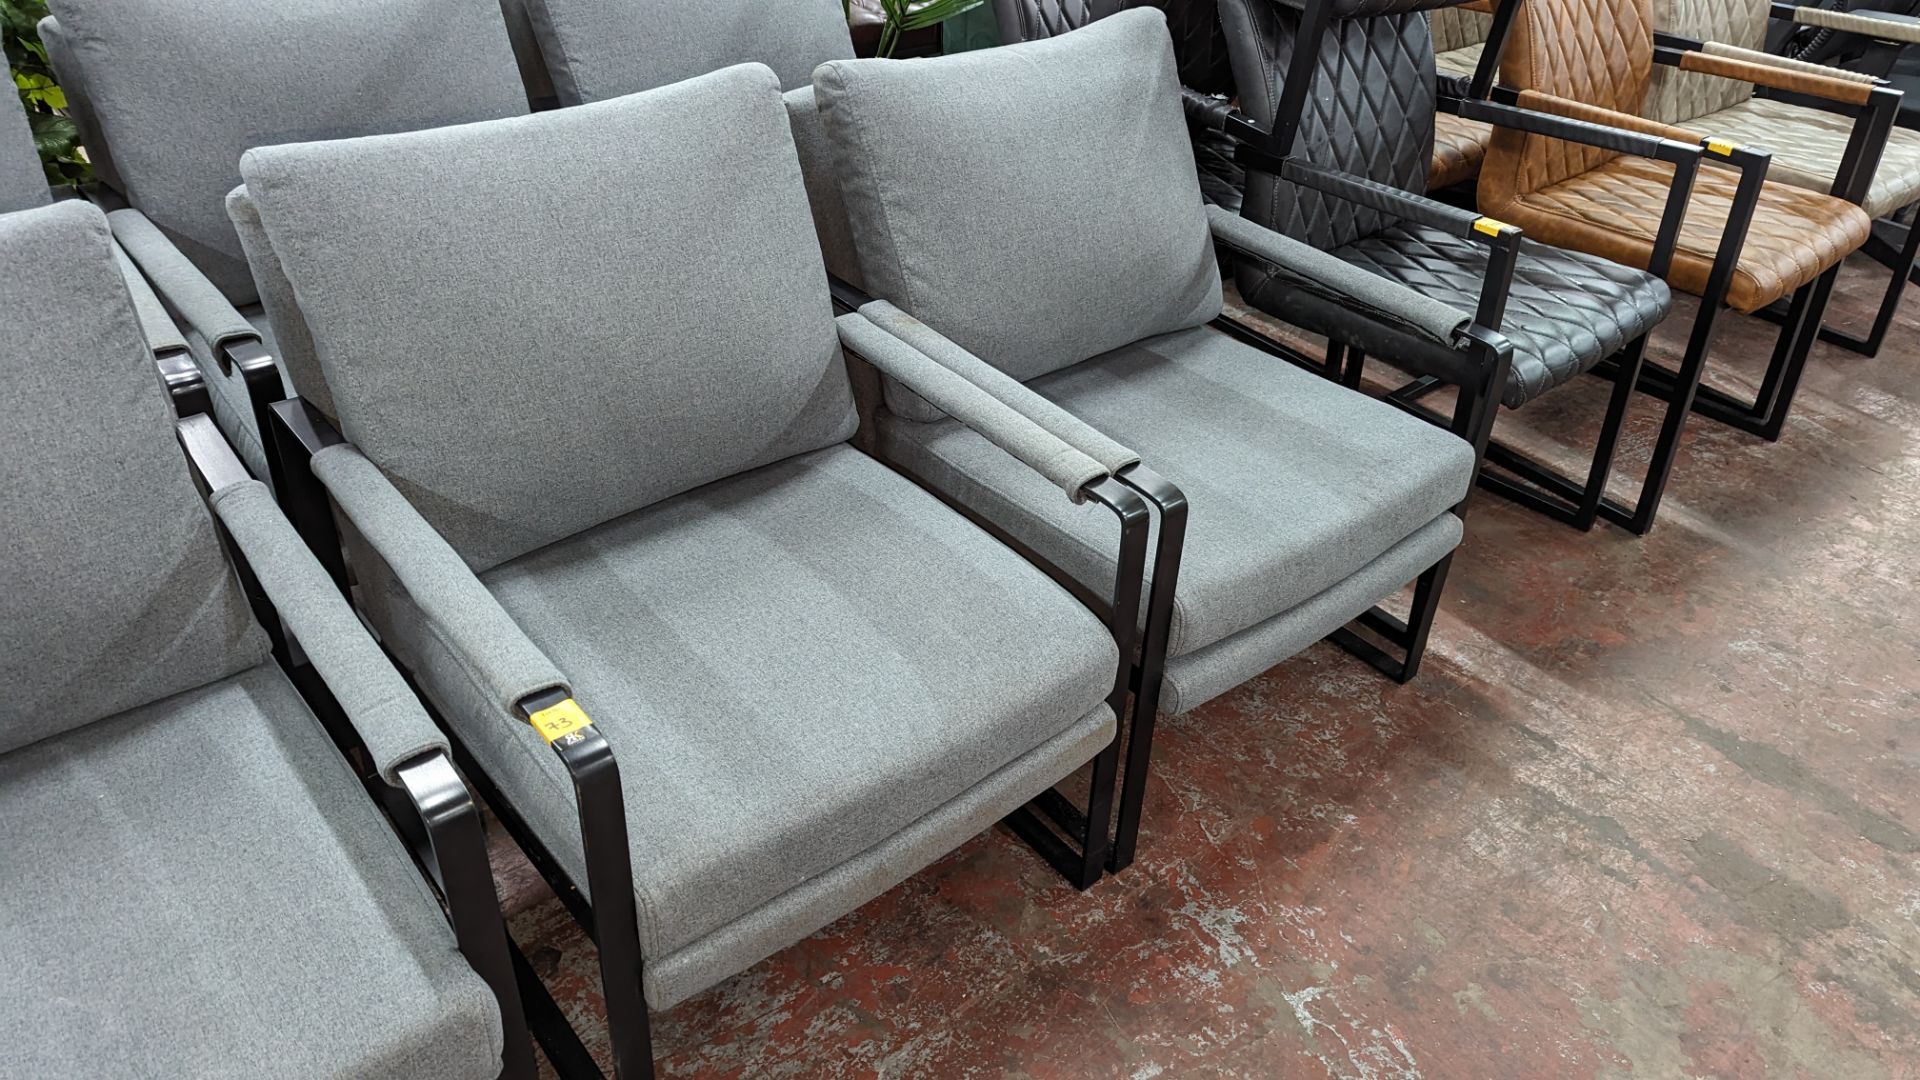 4 off matching chairs on heavy duty black metal frames. NB: The chairs forming lots 71 to 73 all u - Image 2 of 7